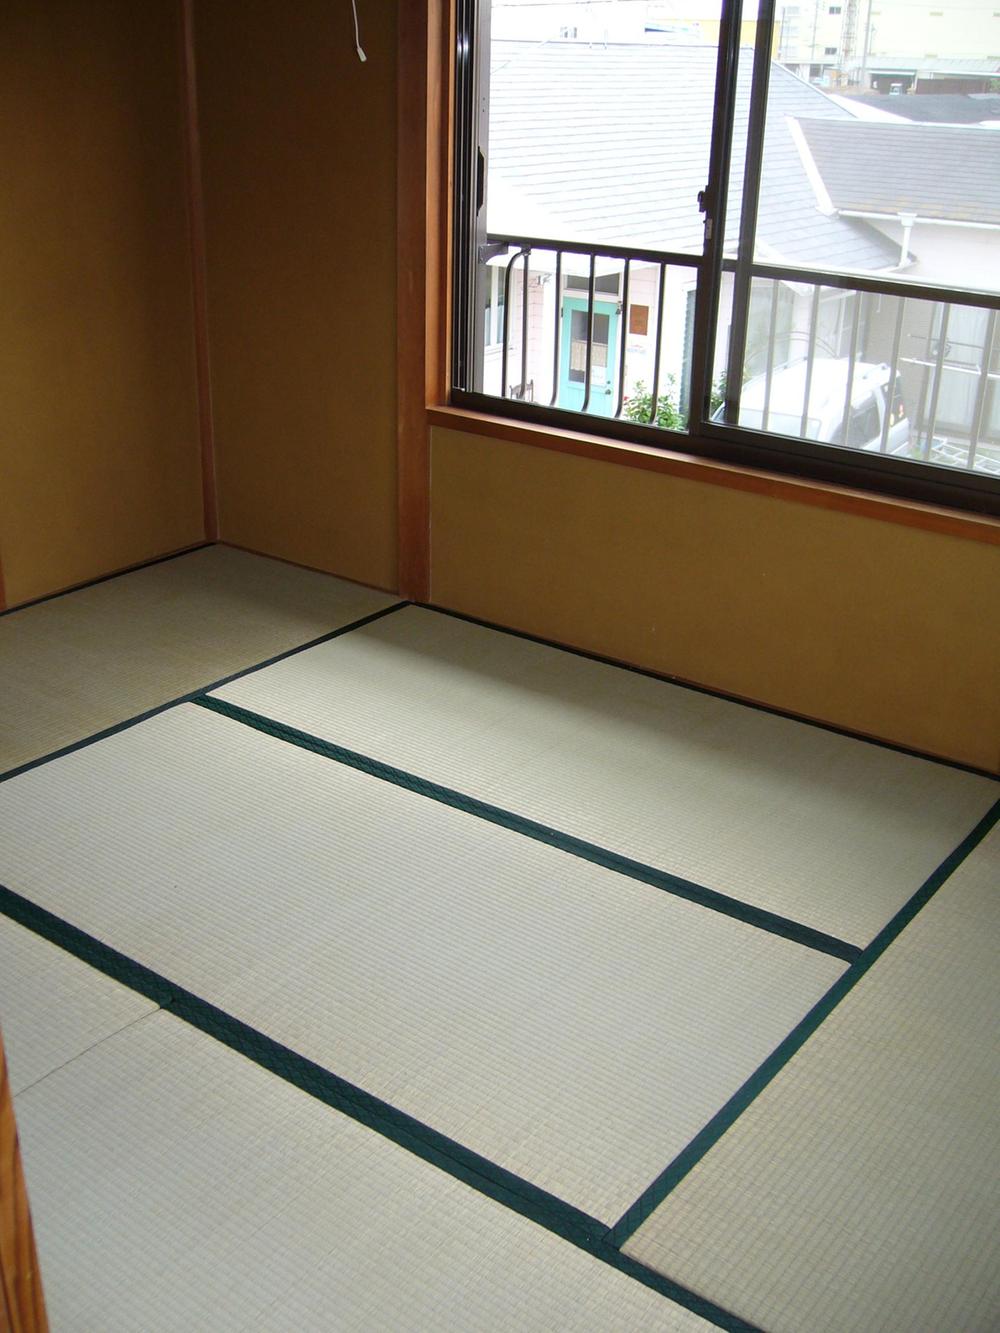 Non-living room. The second floor of a Japanese-style room 6 quires